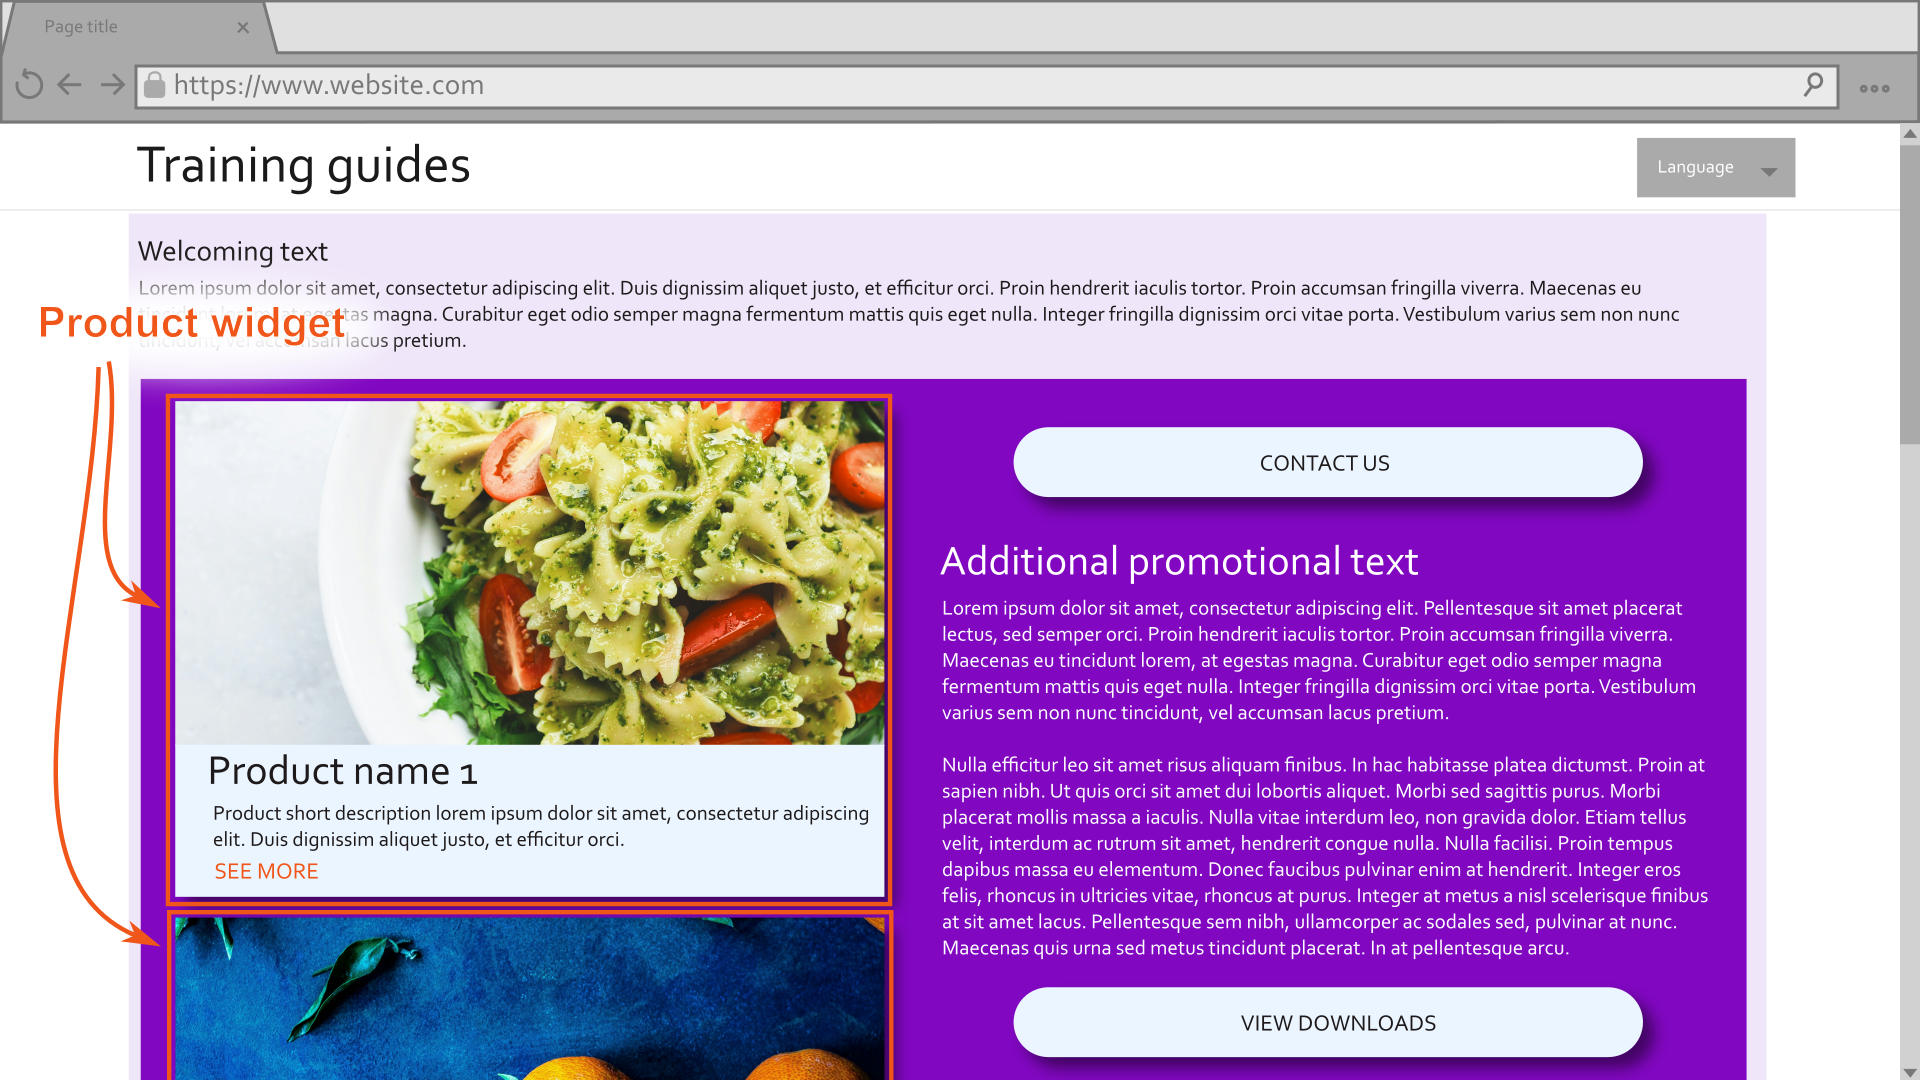 Mockup of a promotional page